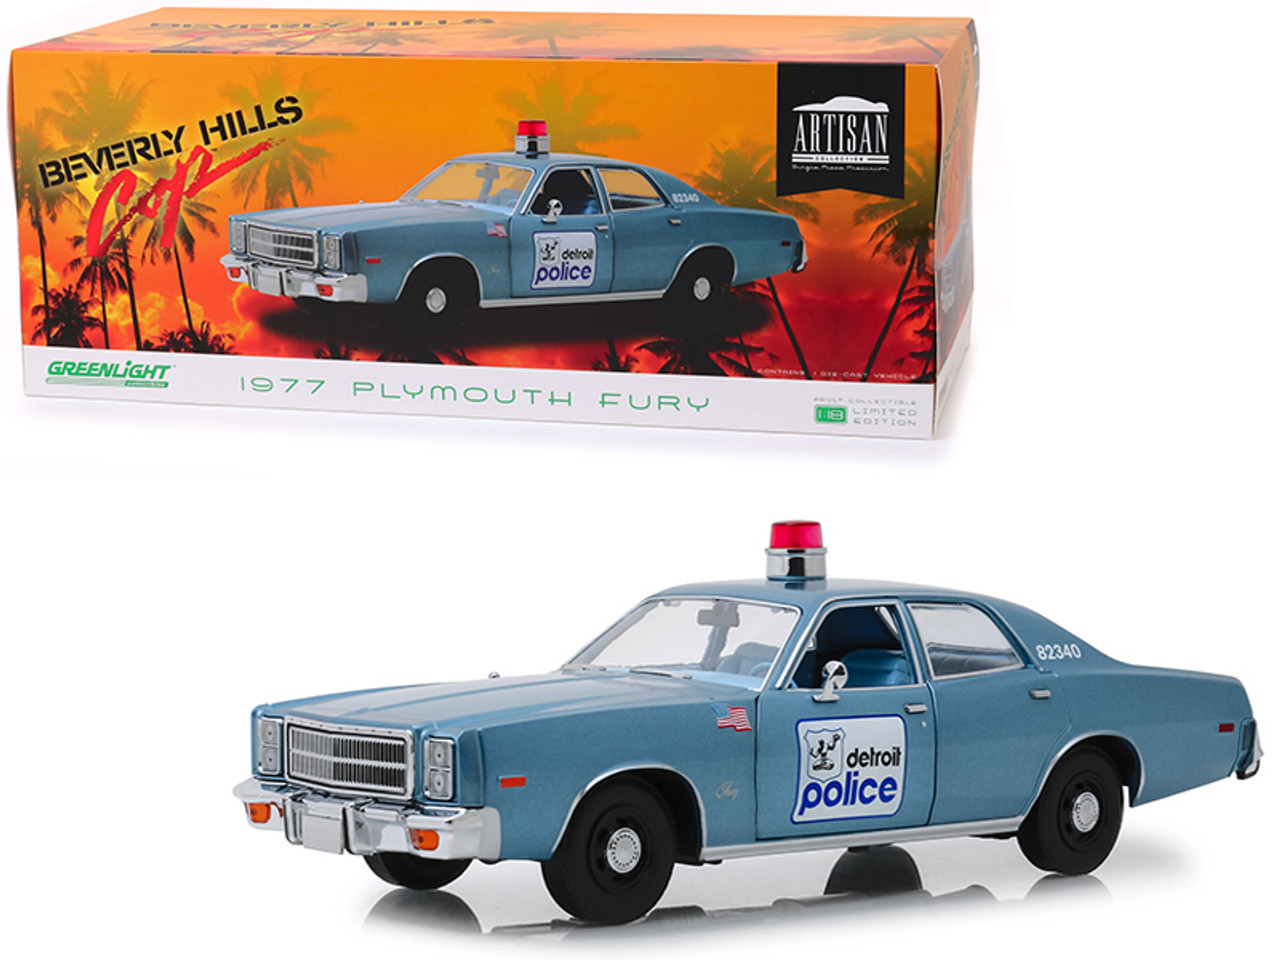 1977 Plymouth Fury Blue "Detroit Police" "Beverly Hills Cop" (1984) Movie 1/18 Diecast Model Car by Greenlight